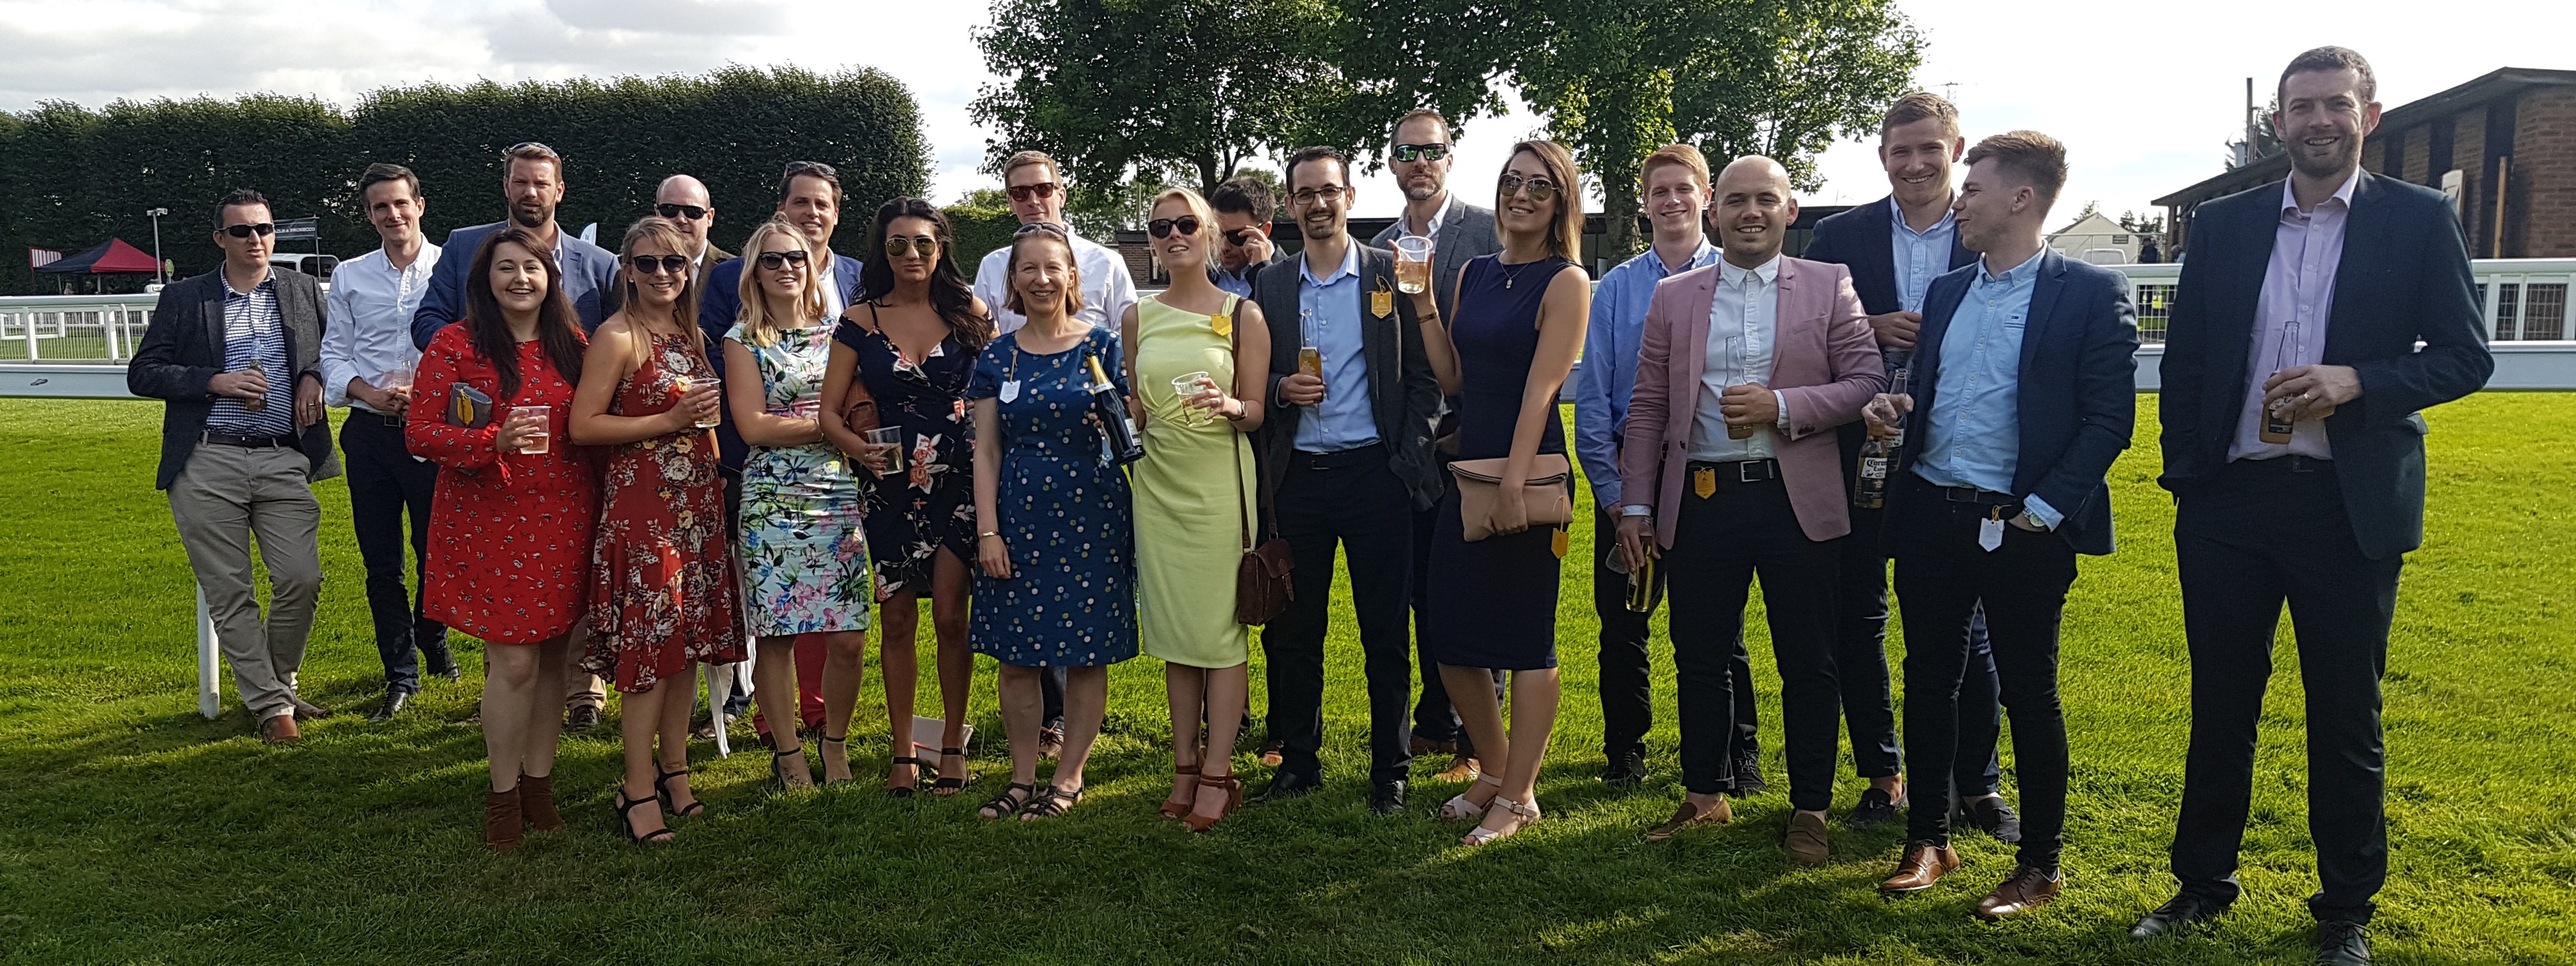 Group photo of employees of Spectrum IT standing on the grass at Salisbury Races